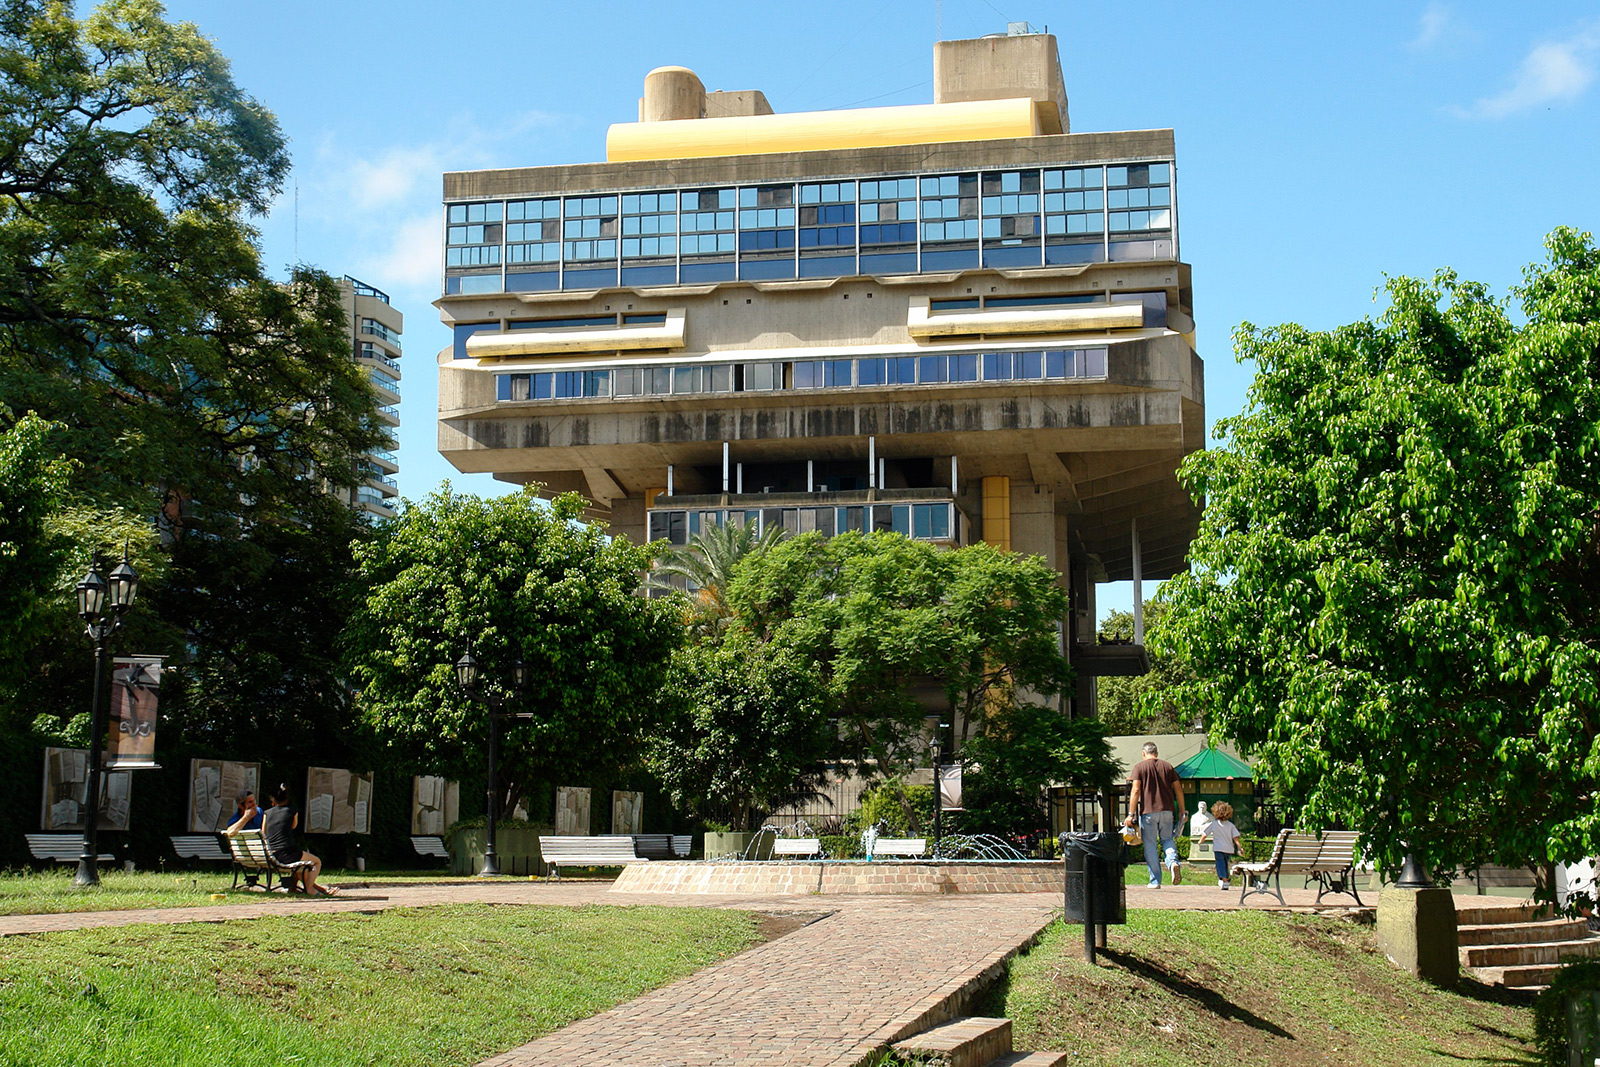 Brutalist Buenos Aires: National Library of Argentina